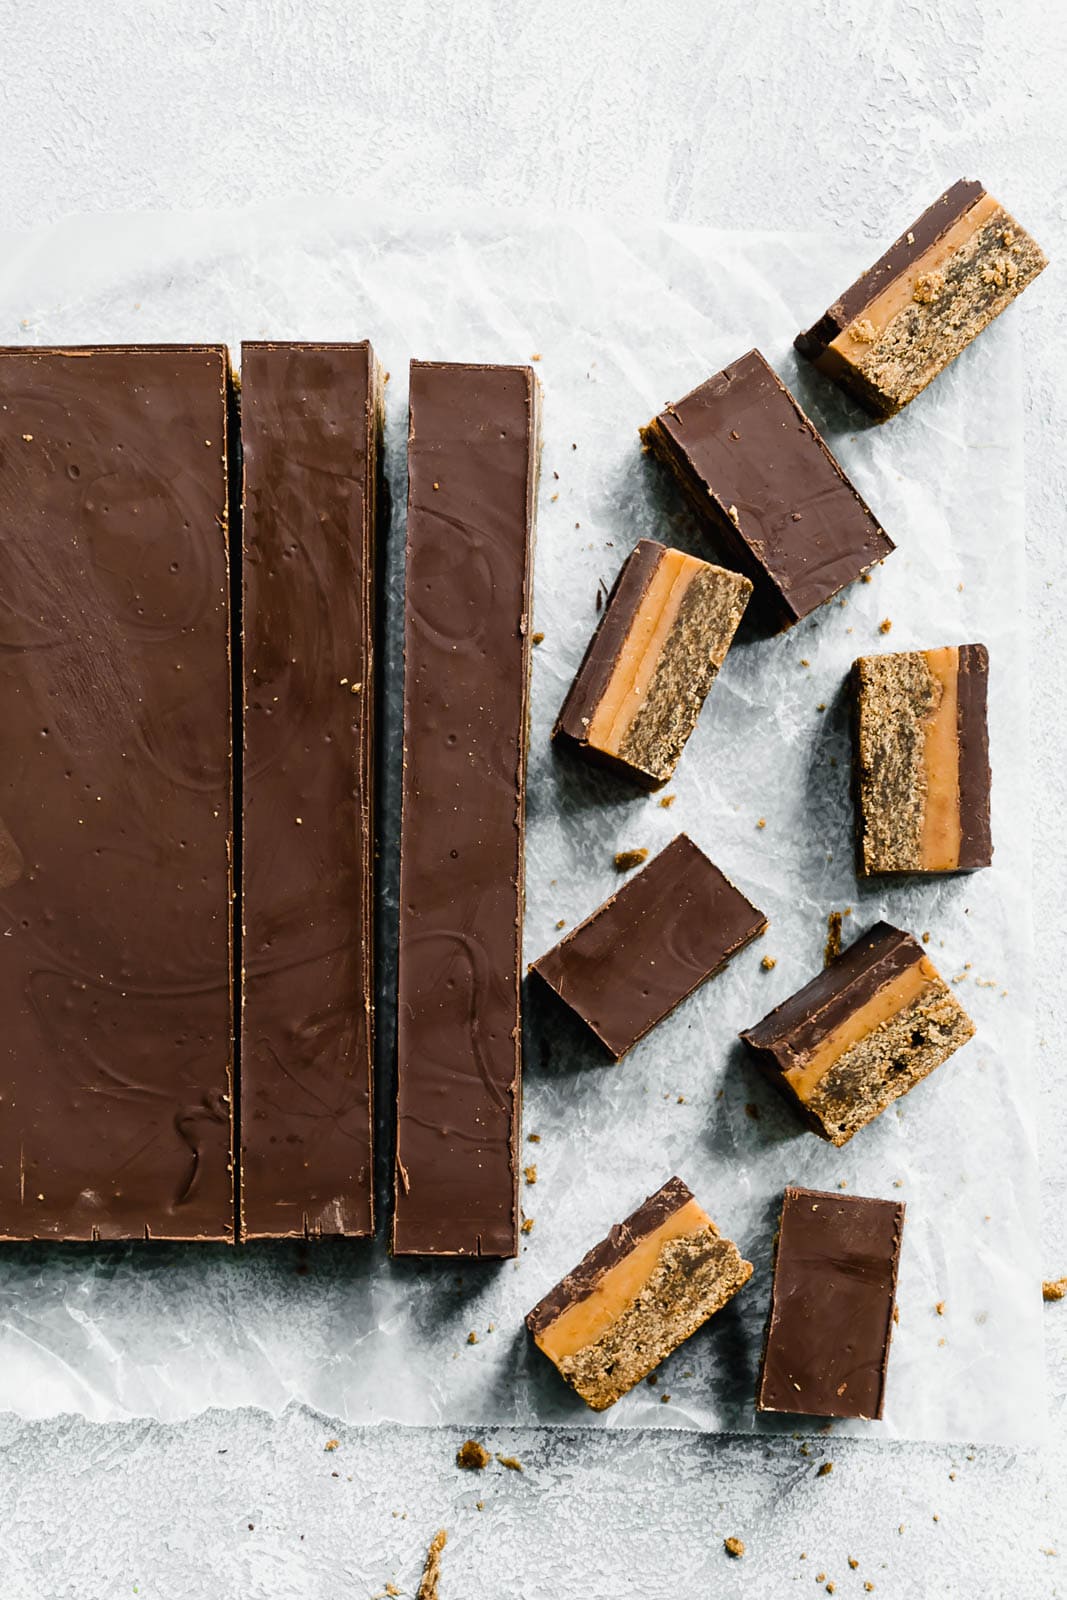 Classic Millionaire Bars get a twist with these Gingerbread Millionaire Bars! Made with spiced ginger shortbread, homemade chewy caramel, and chocolate!